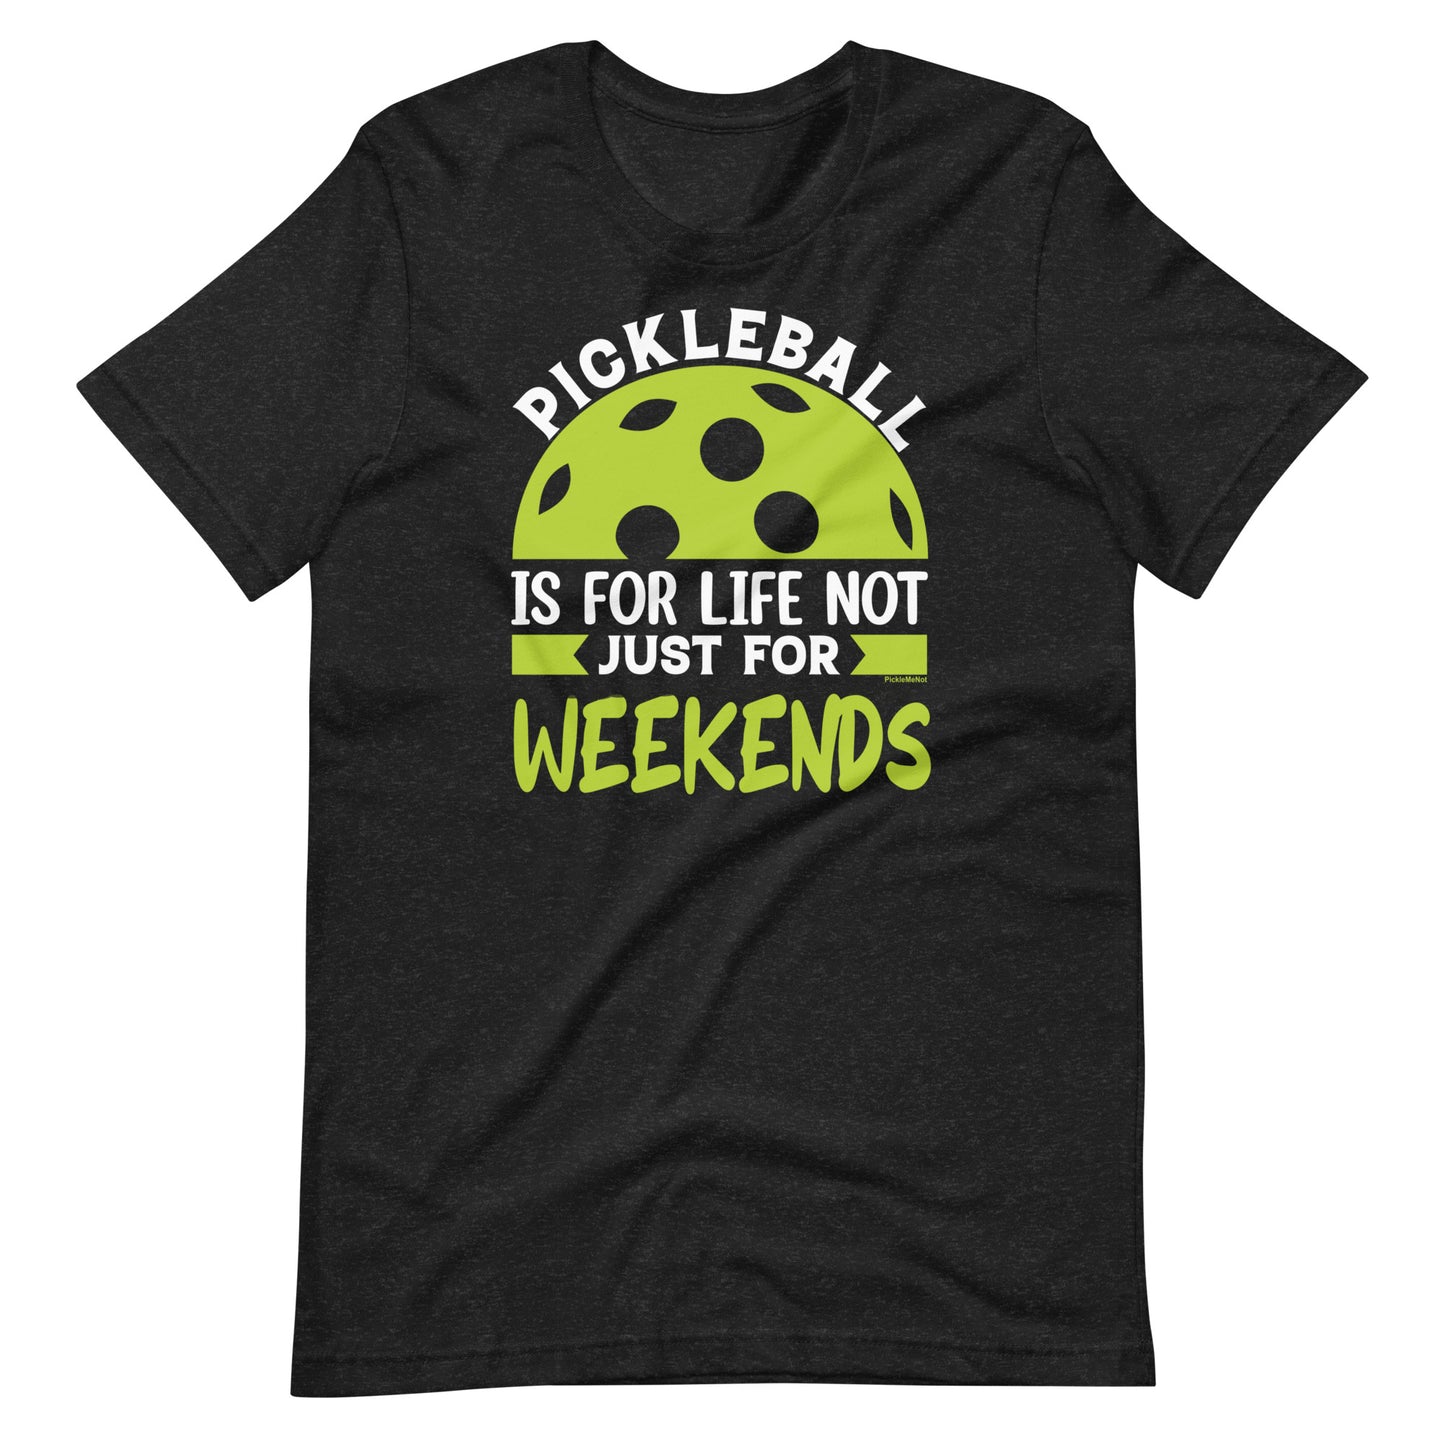 Funny Pickleball Pun: "Pickleball is For Life Not Just for the Weekend", Unisex T-Shirt